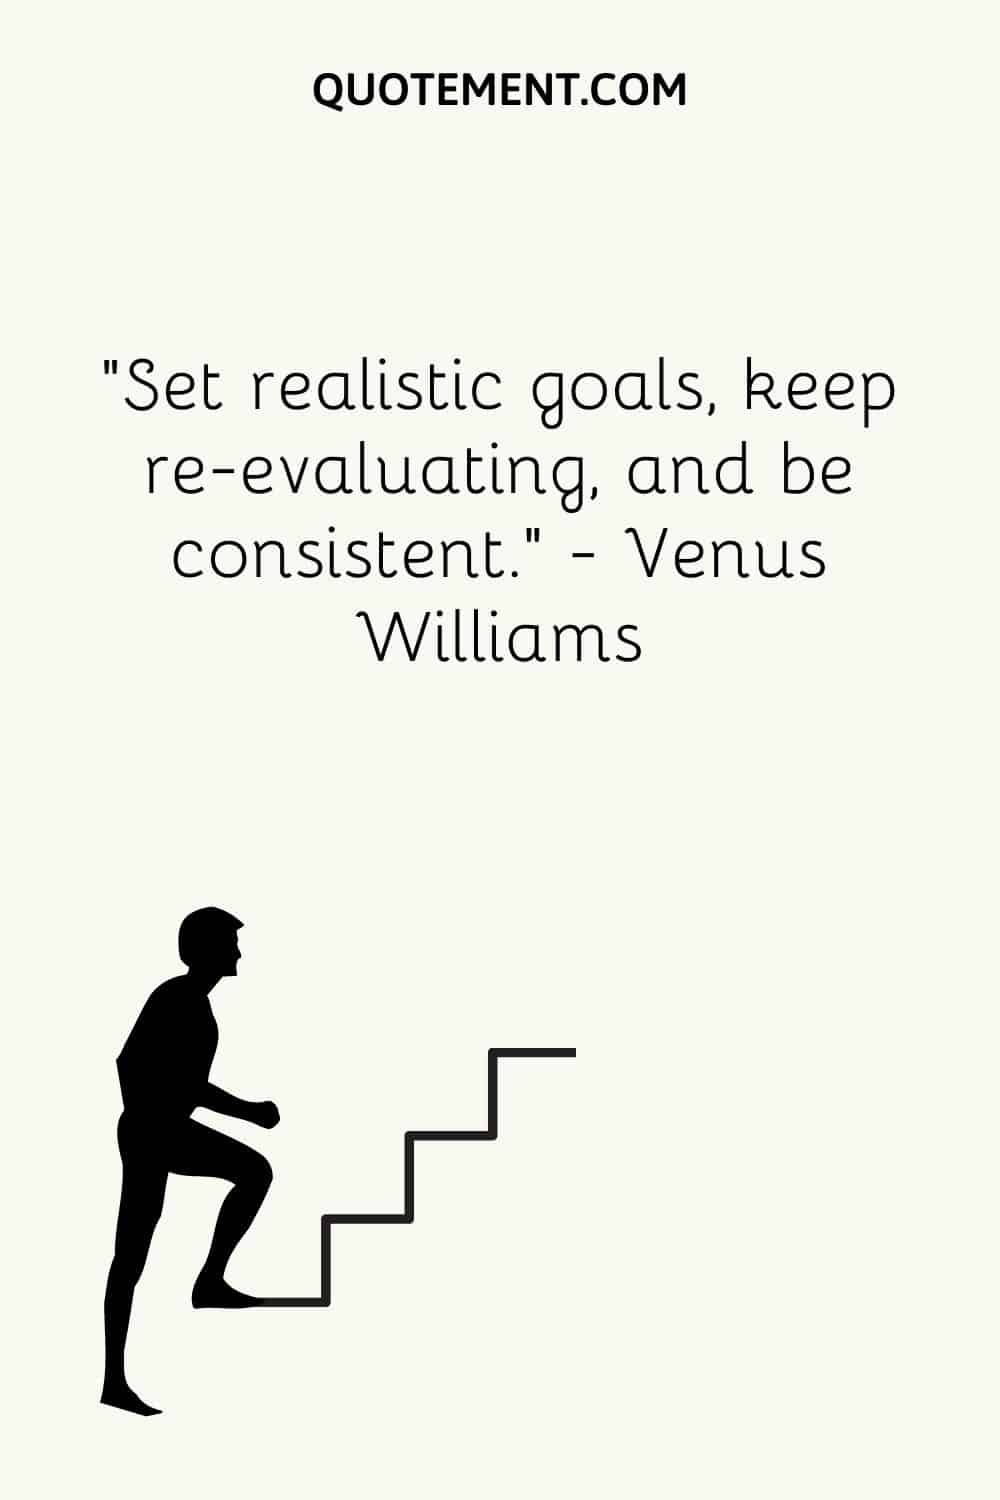 Set realistic goals, keep re-evaluating, and be consistent